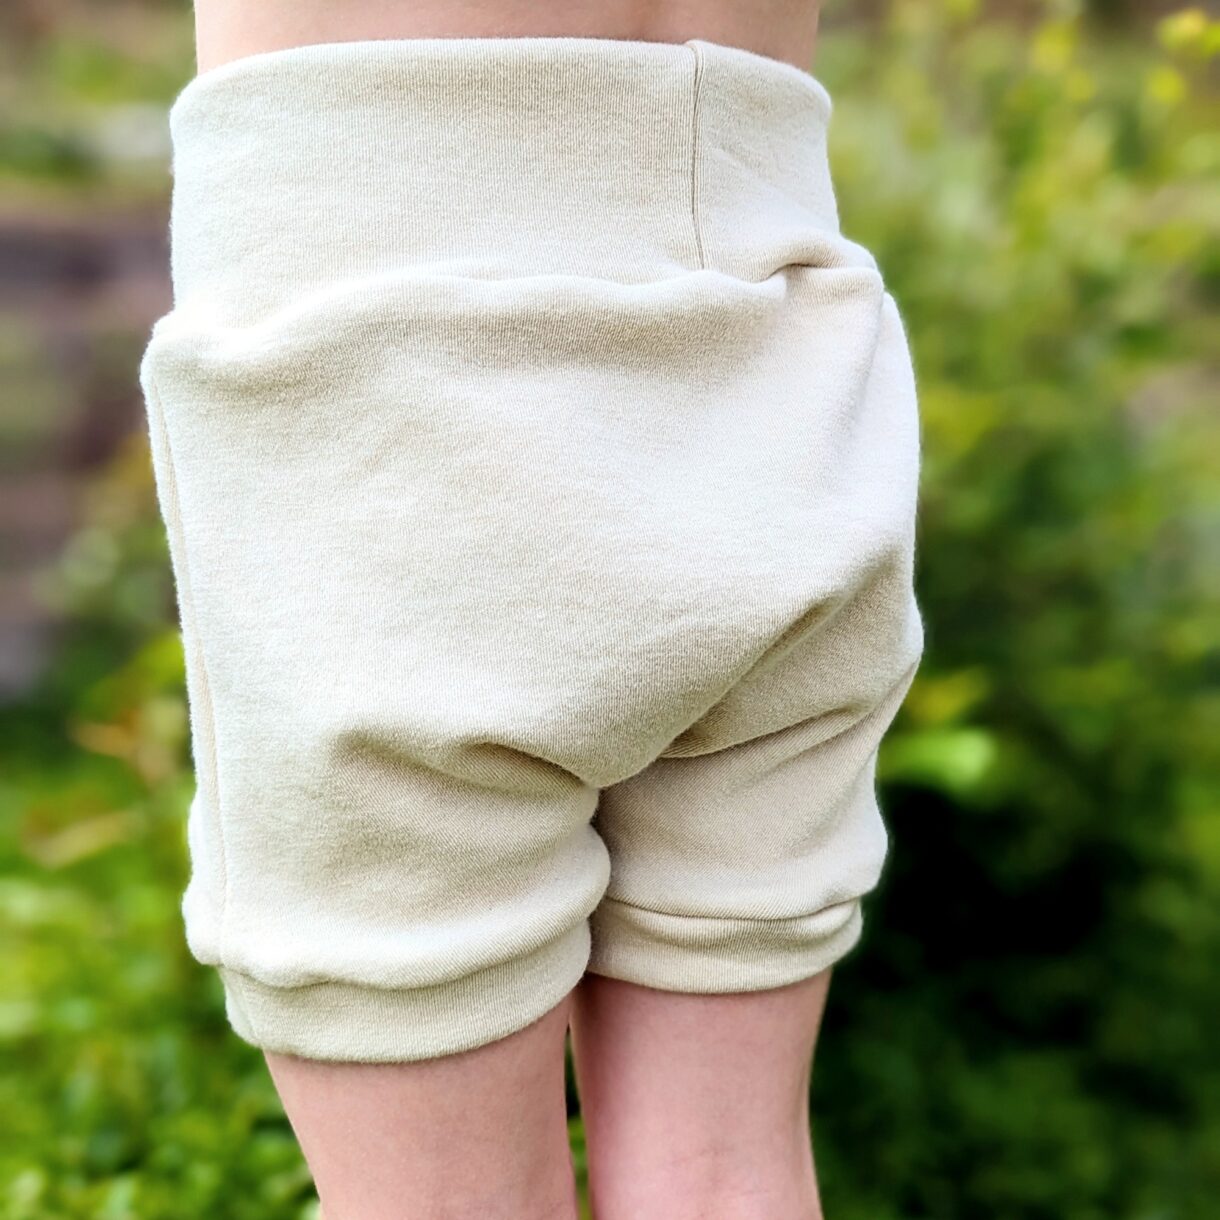 Merino Wool Shorties in Natural Cream Color modeled for fit showing extra room in front and back to pair with a cloth diaper or to be worn as a normal article of clothing